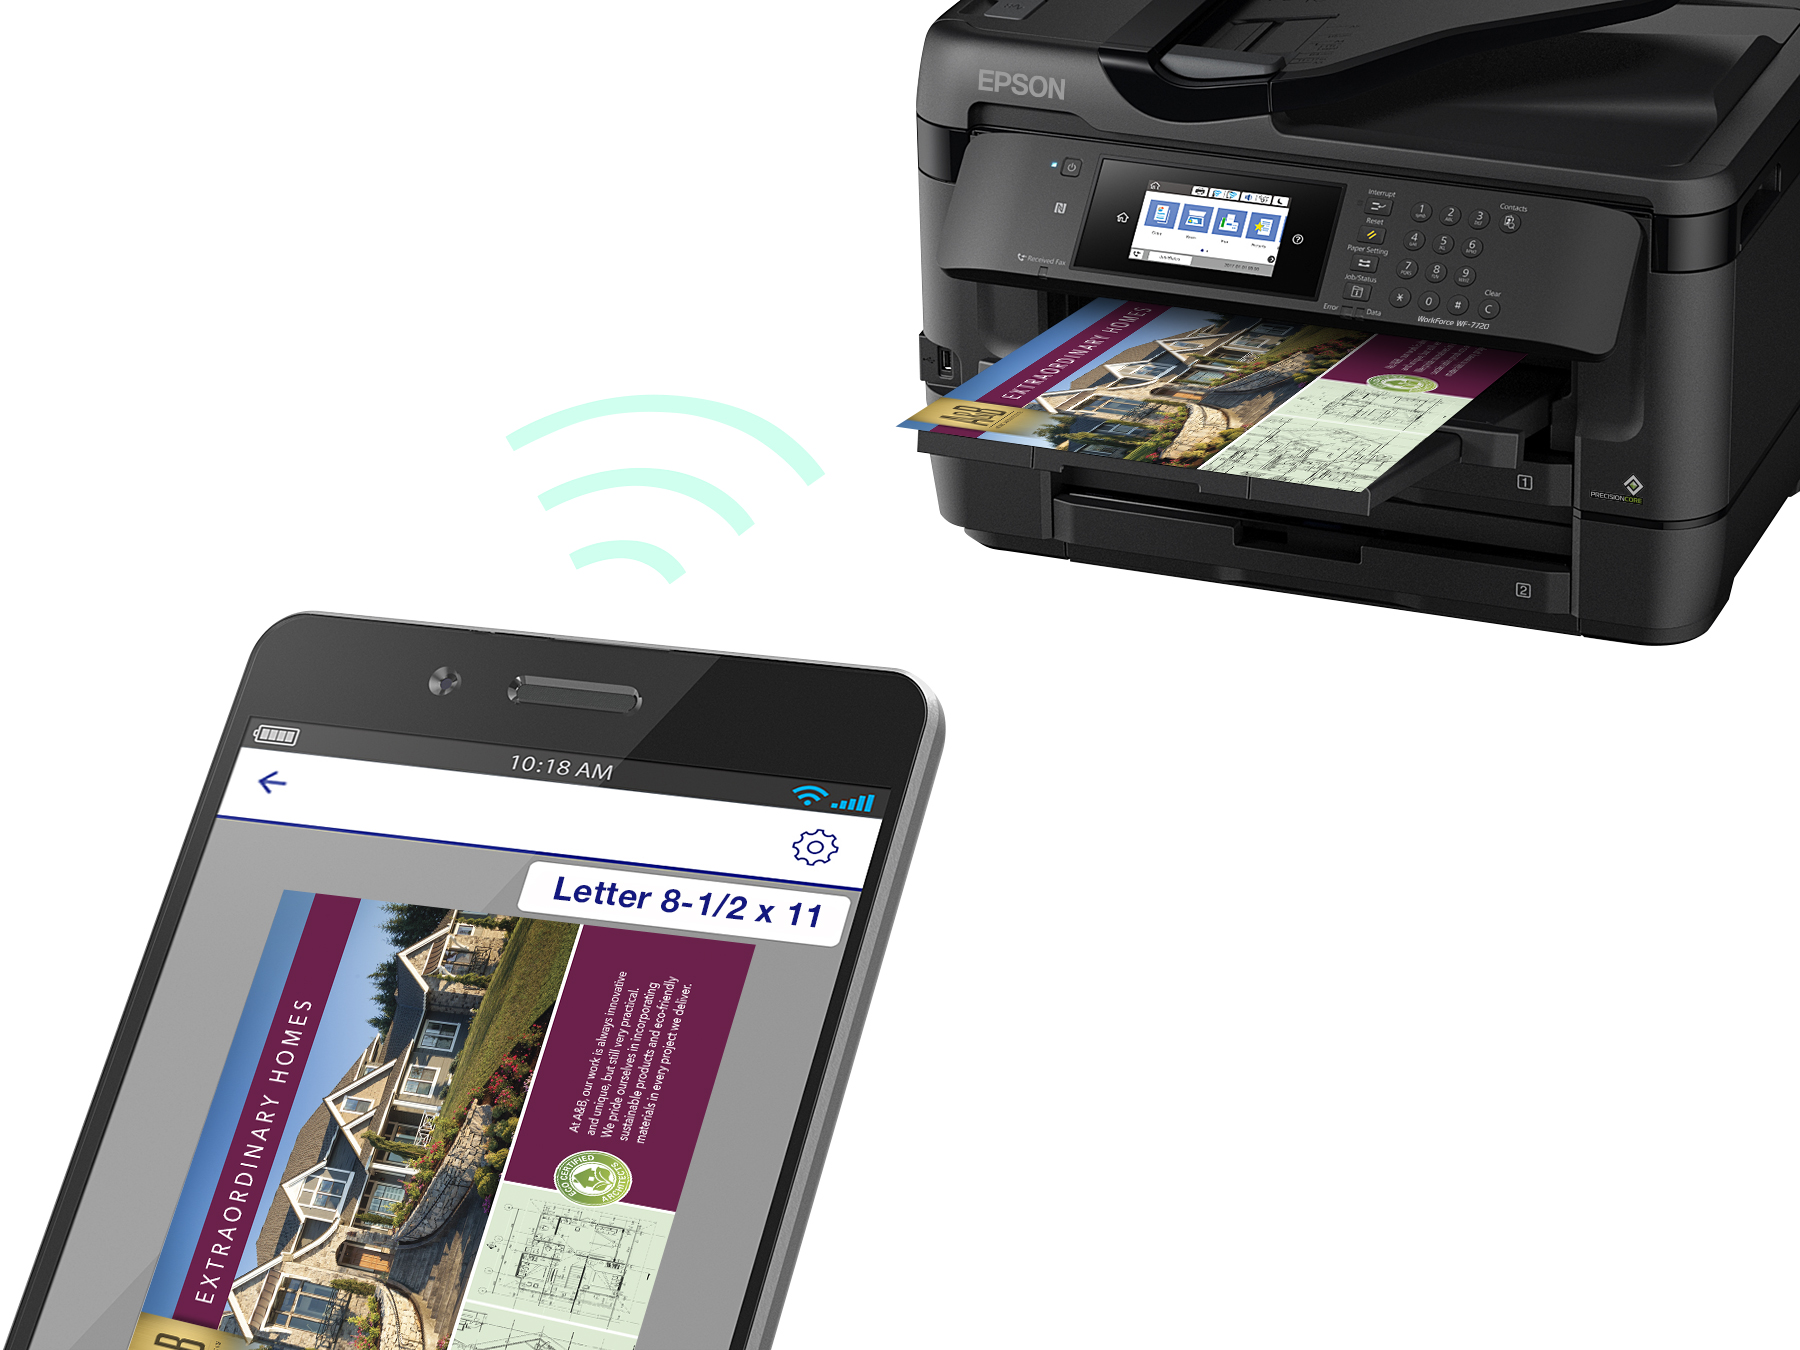 Epson WorkForce WF-7720 Wireless Wide-format Color Inkjet Printer with Copy, Scan, Fax, Wi-Fi Direct and Ethernet - image 4 of 5